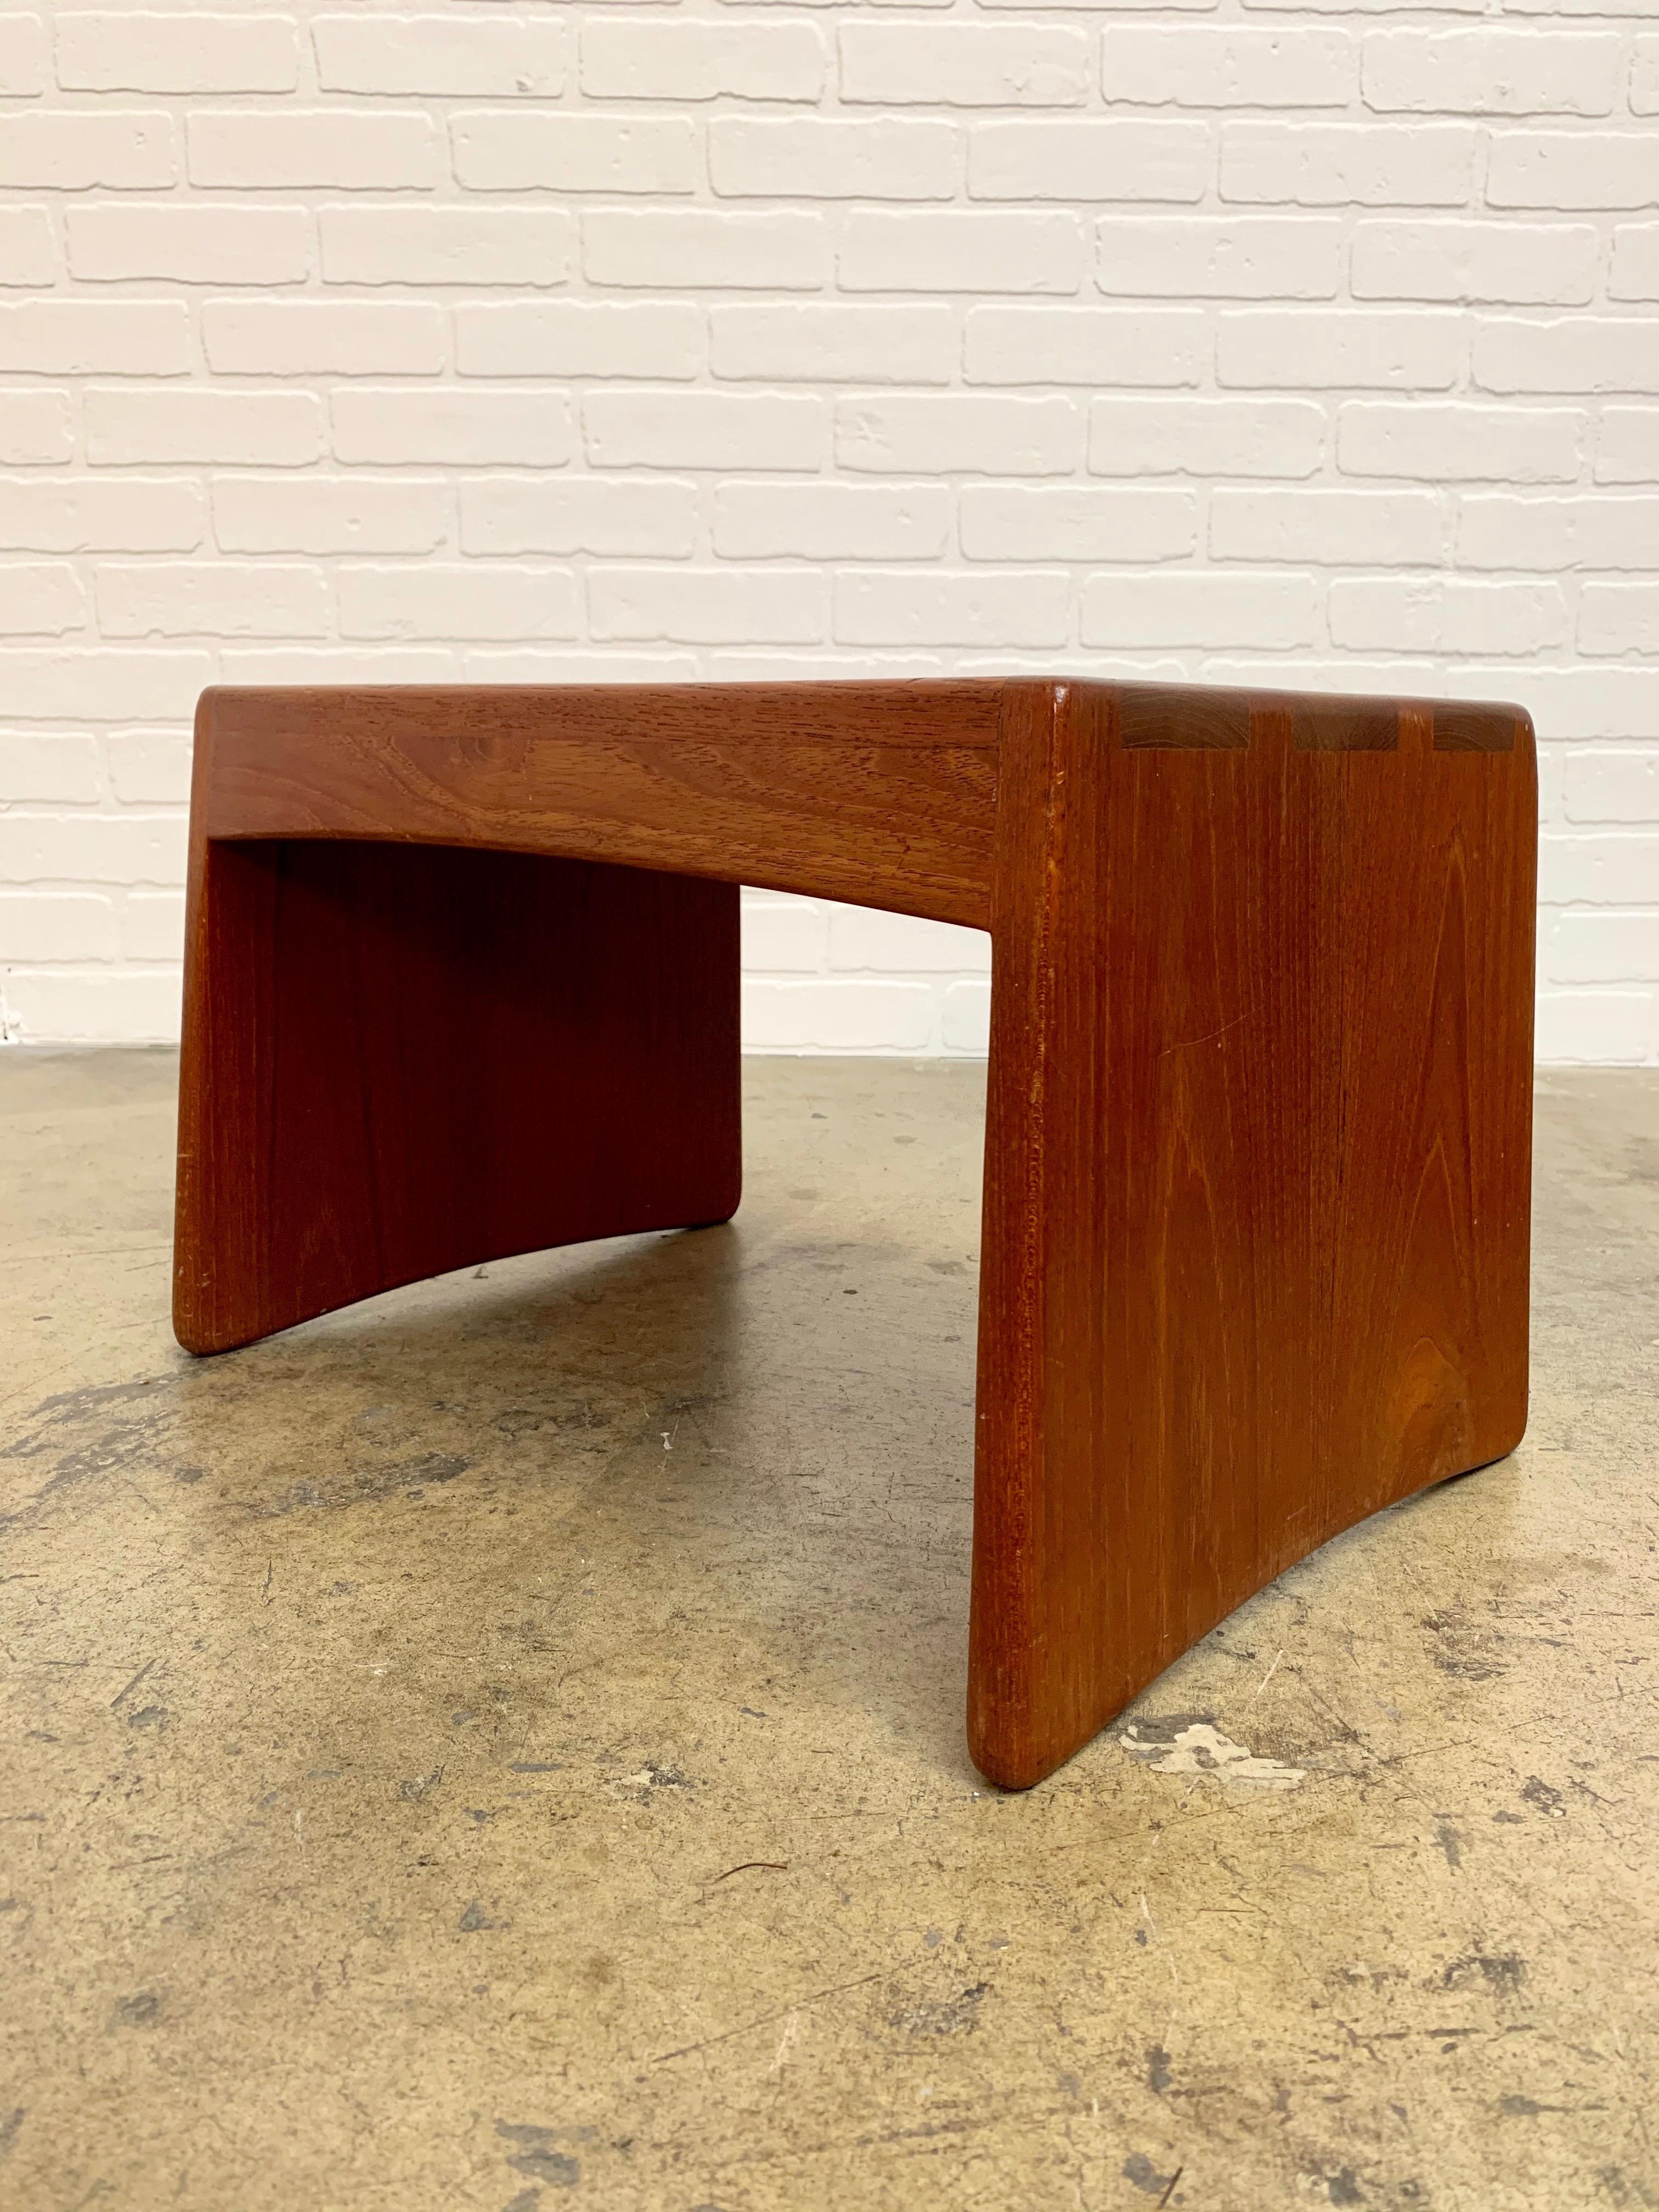 Solid thick teak wood with dovetailed corners can be also used for a side table.